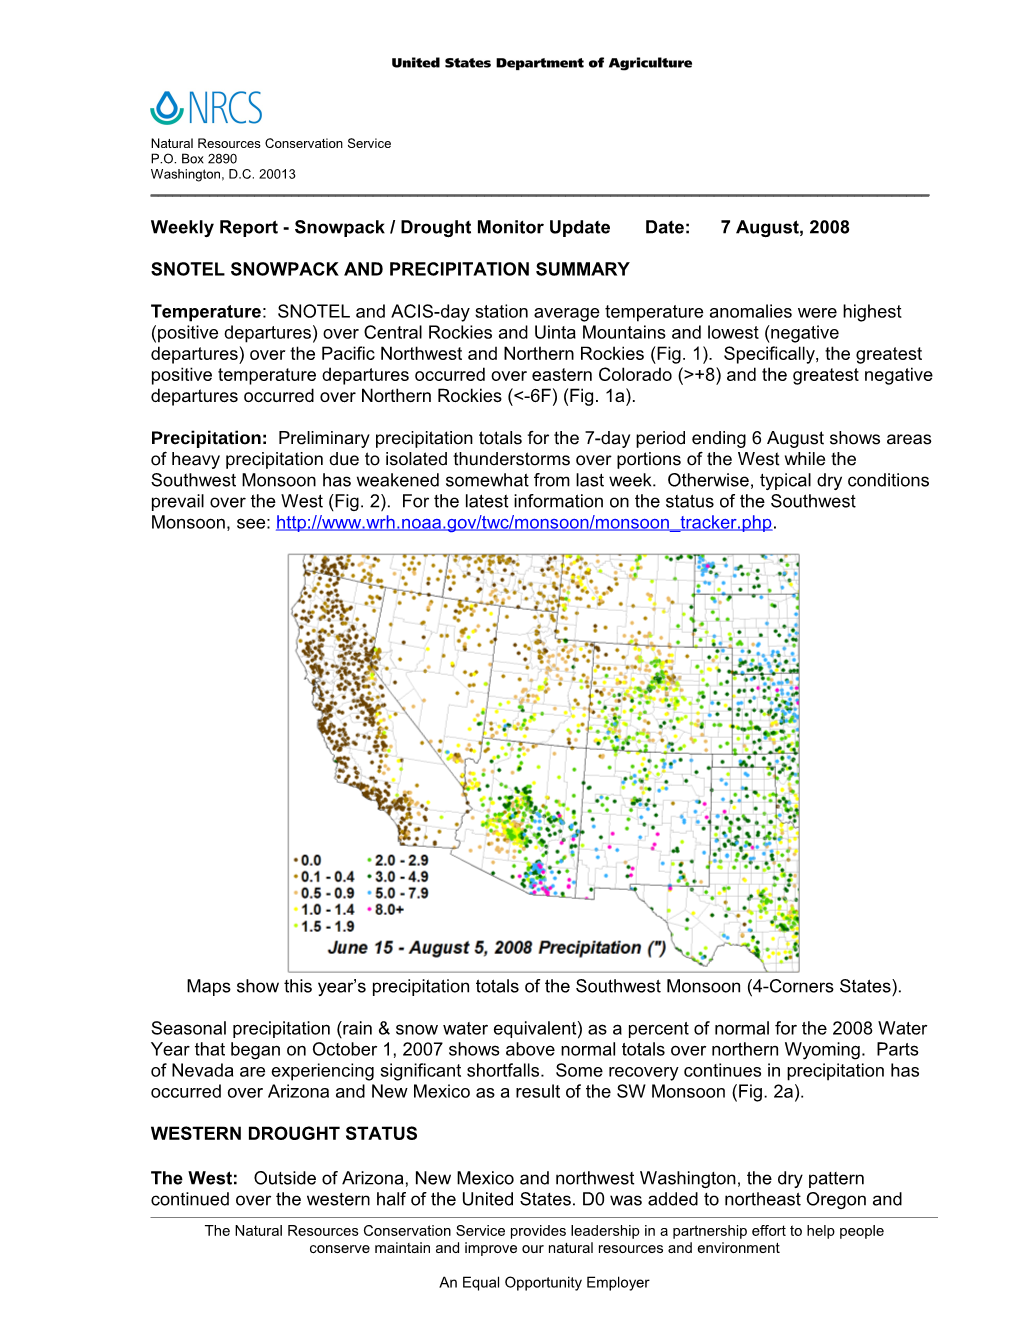 Weekly Report Drought Monitor / Snowpack Update s6